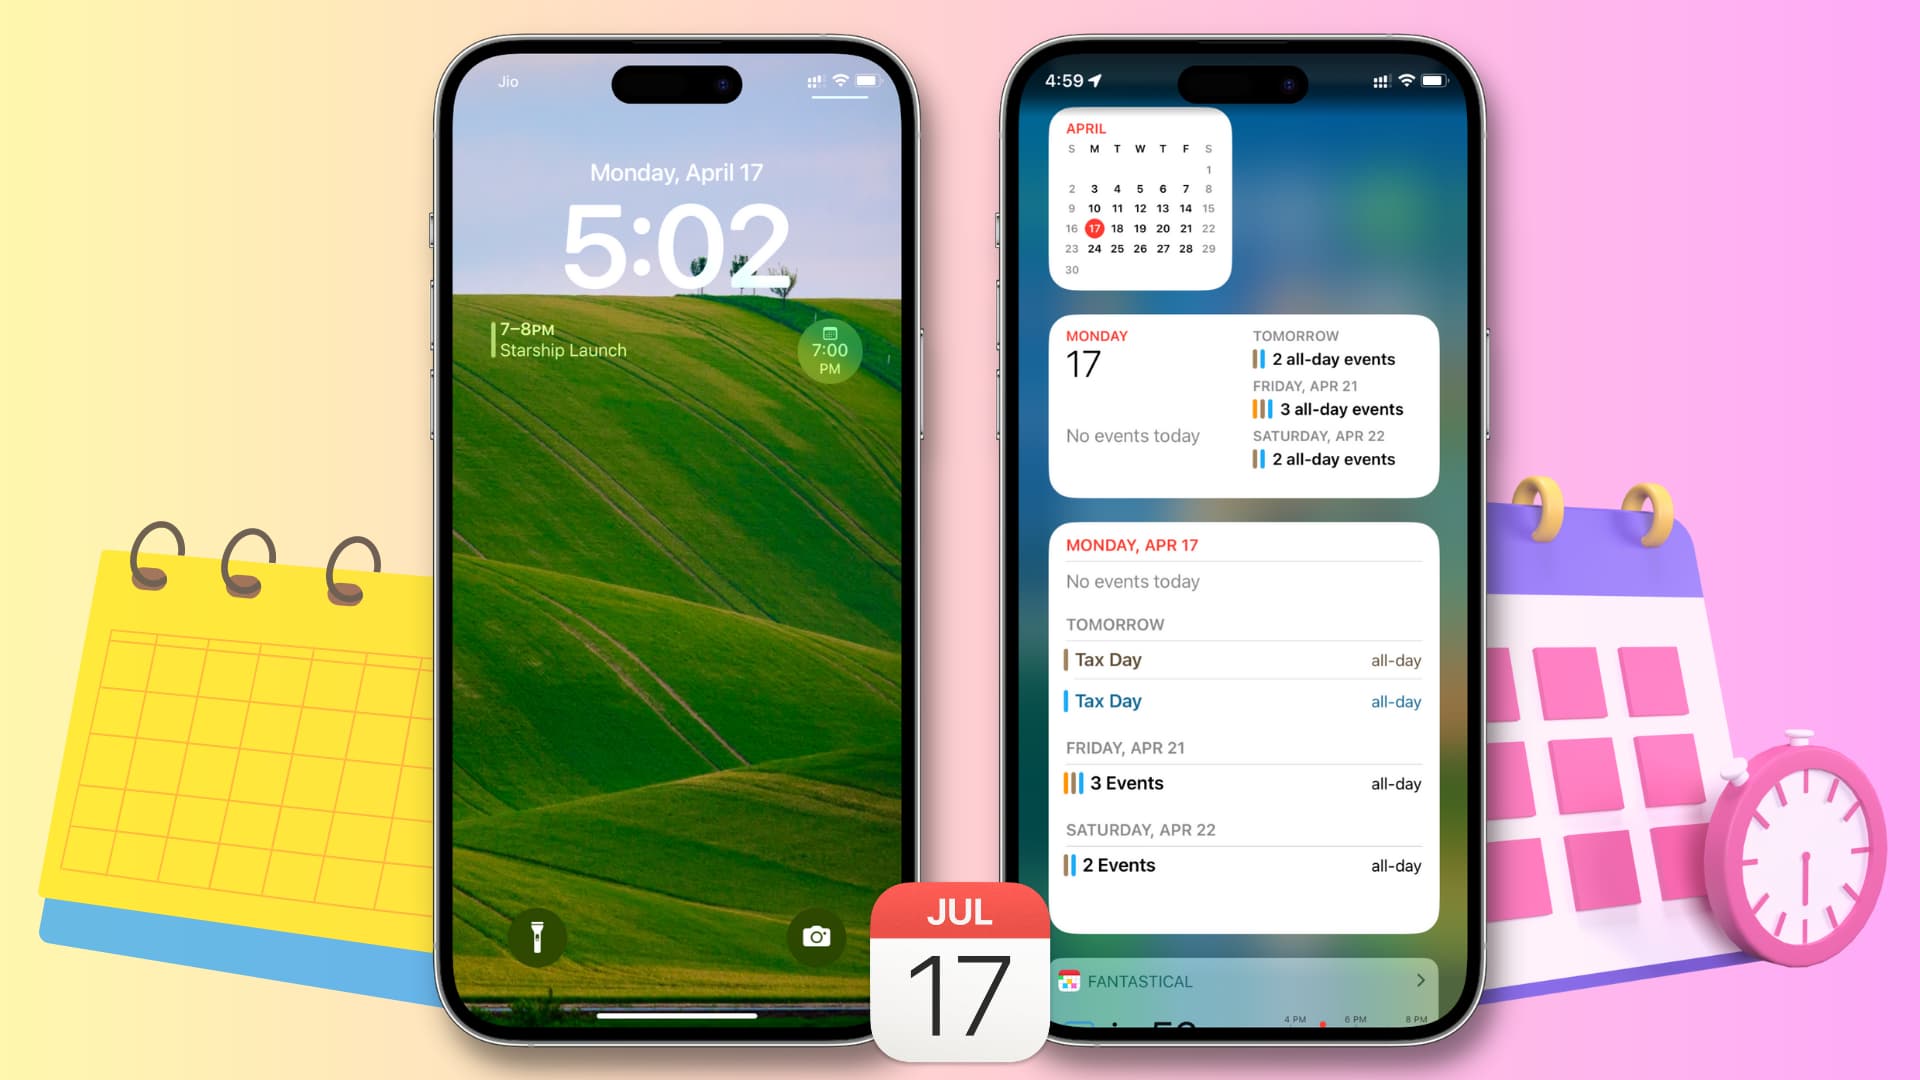 Calendar widgets on iPhone Lock Screen and Today View